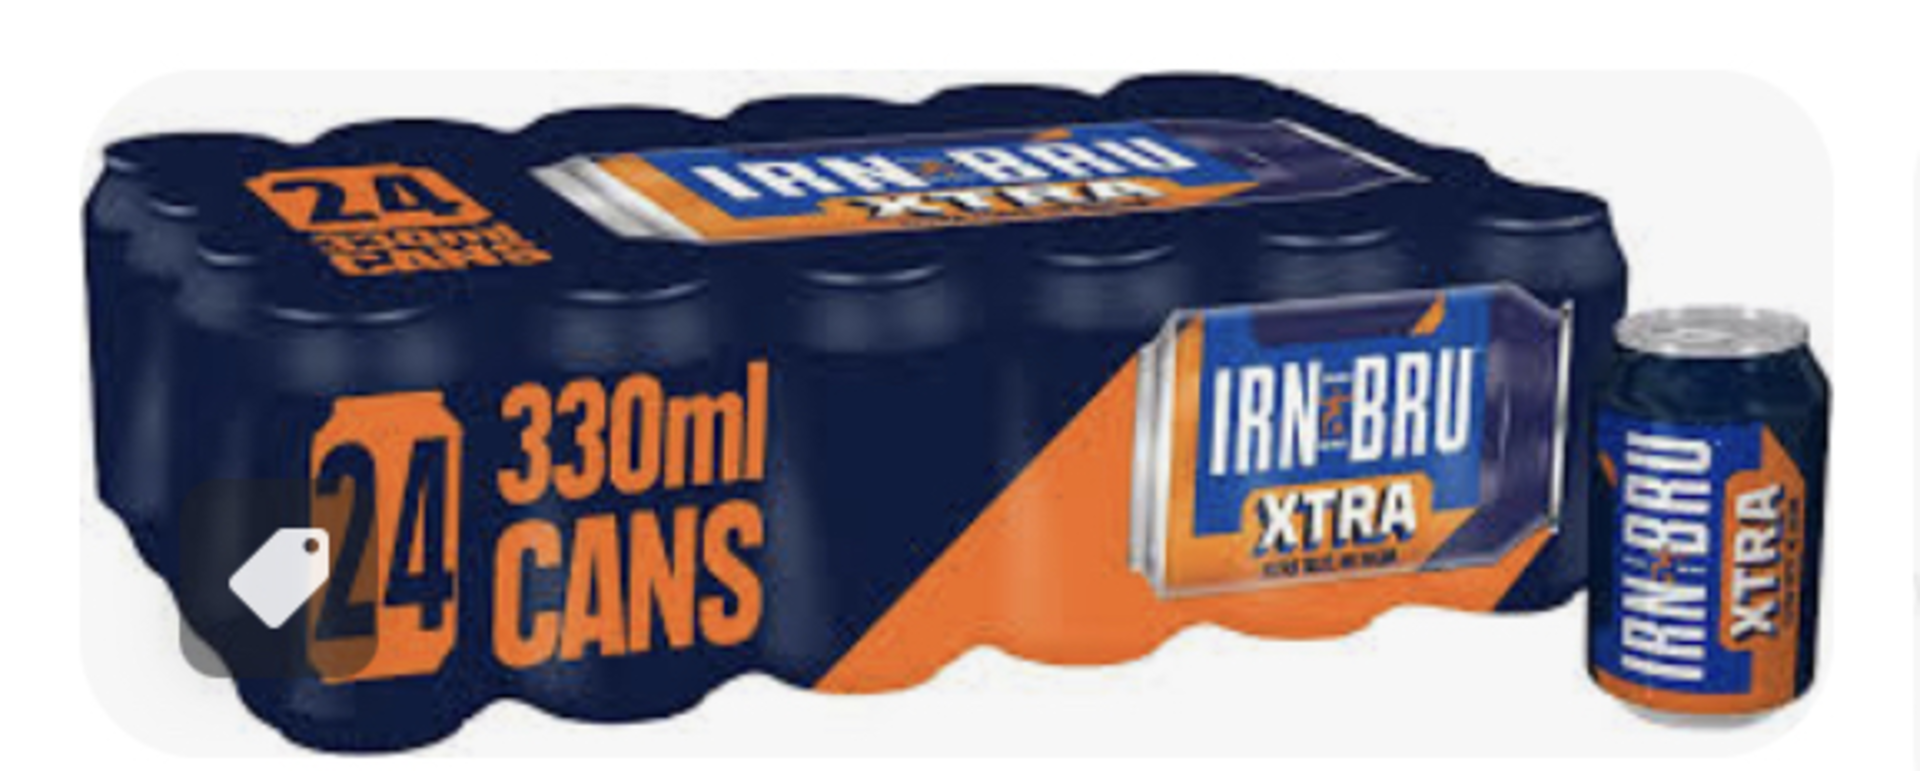 RRP £991 (Approx. Count 69) spW33c1142n IRN-BRU Fizzy Drinks Since 1901 Multipack Cans, XTRA Taste